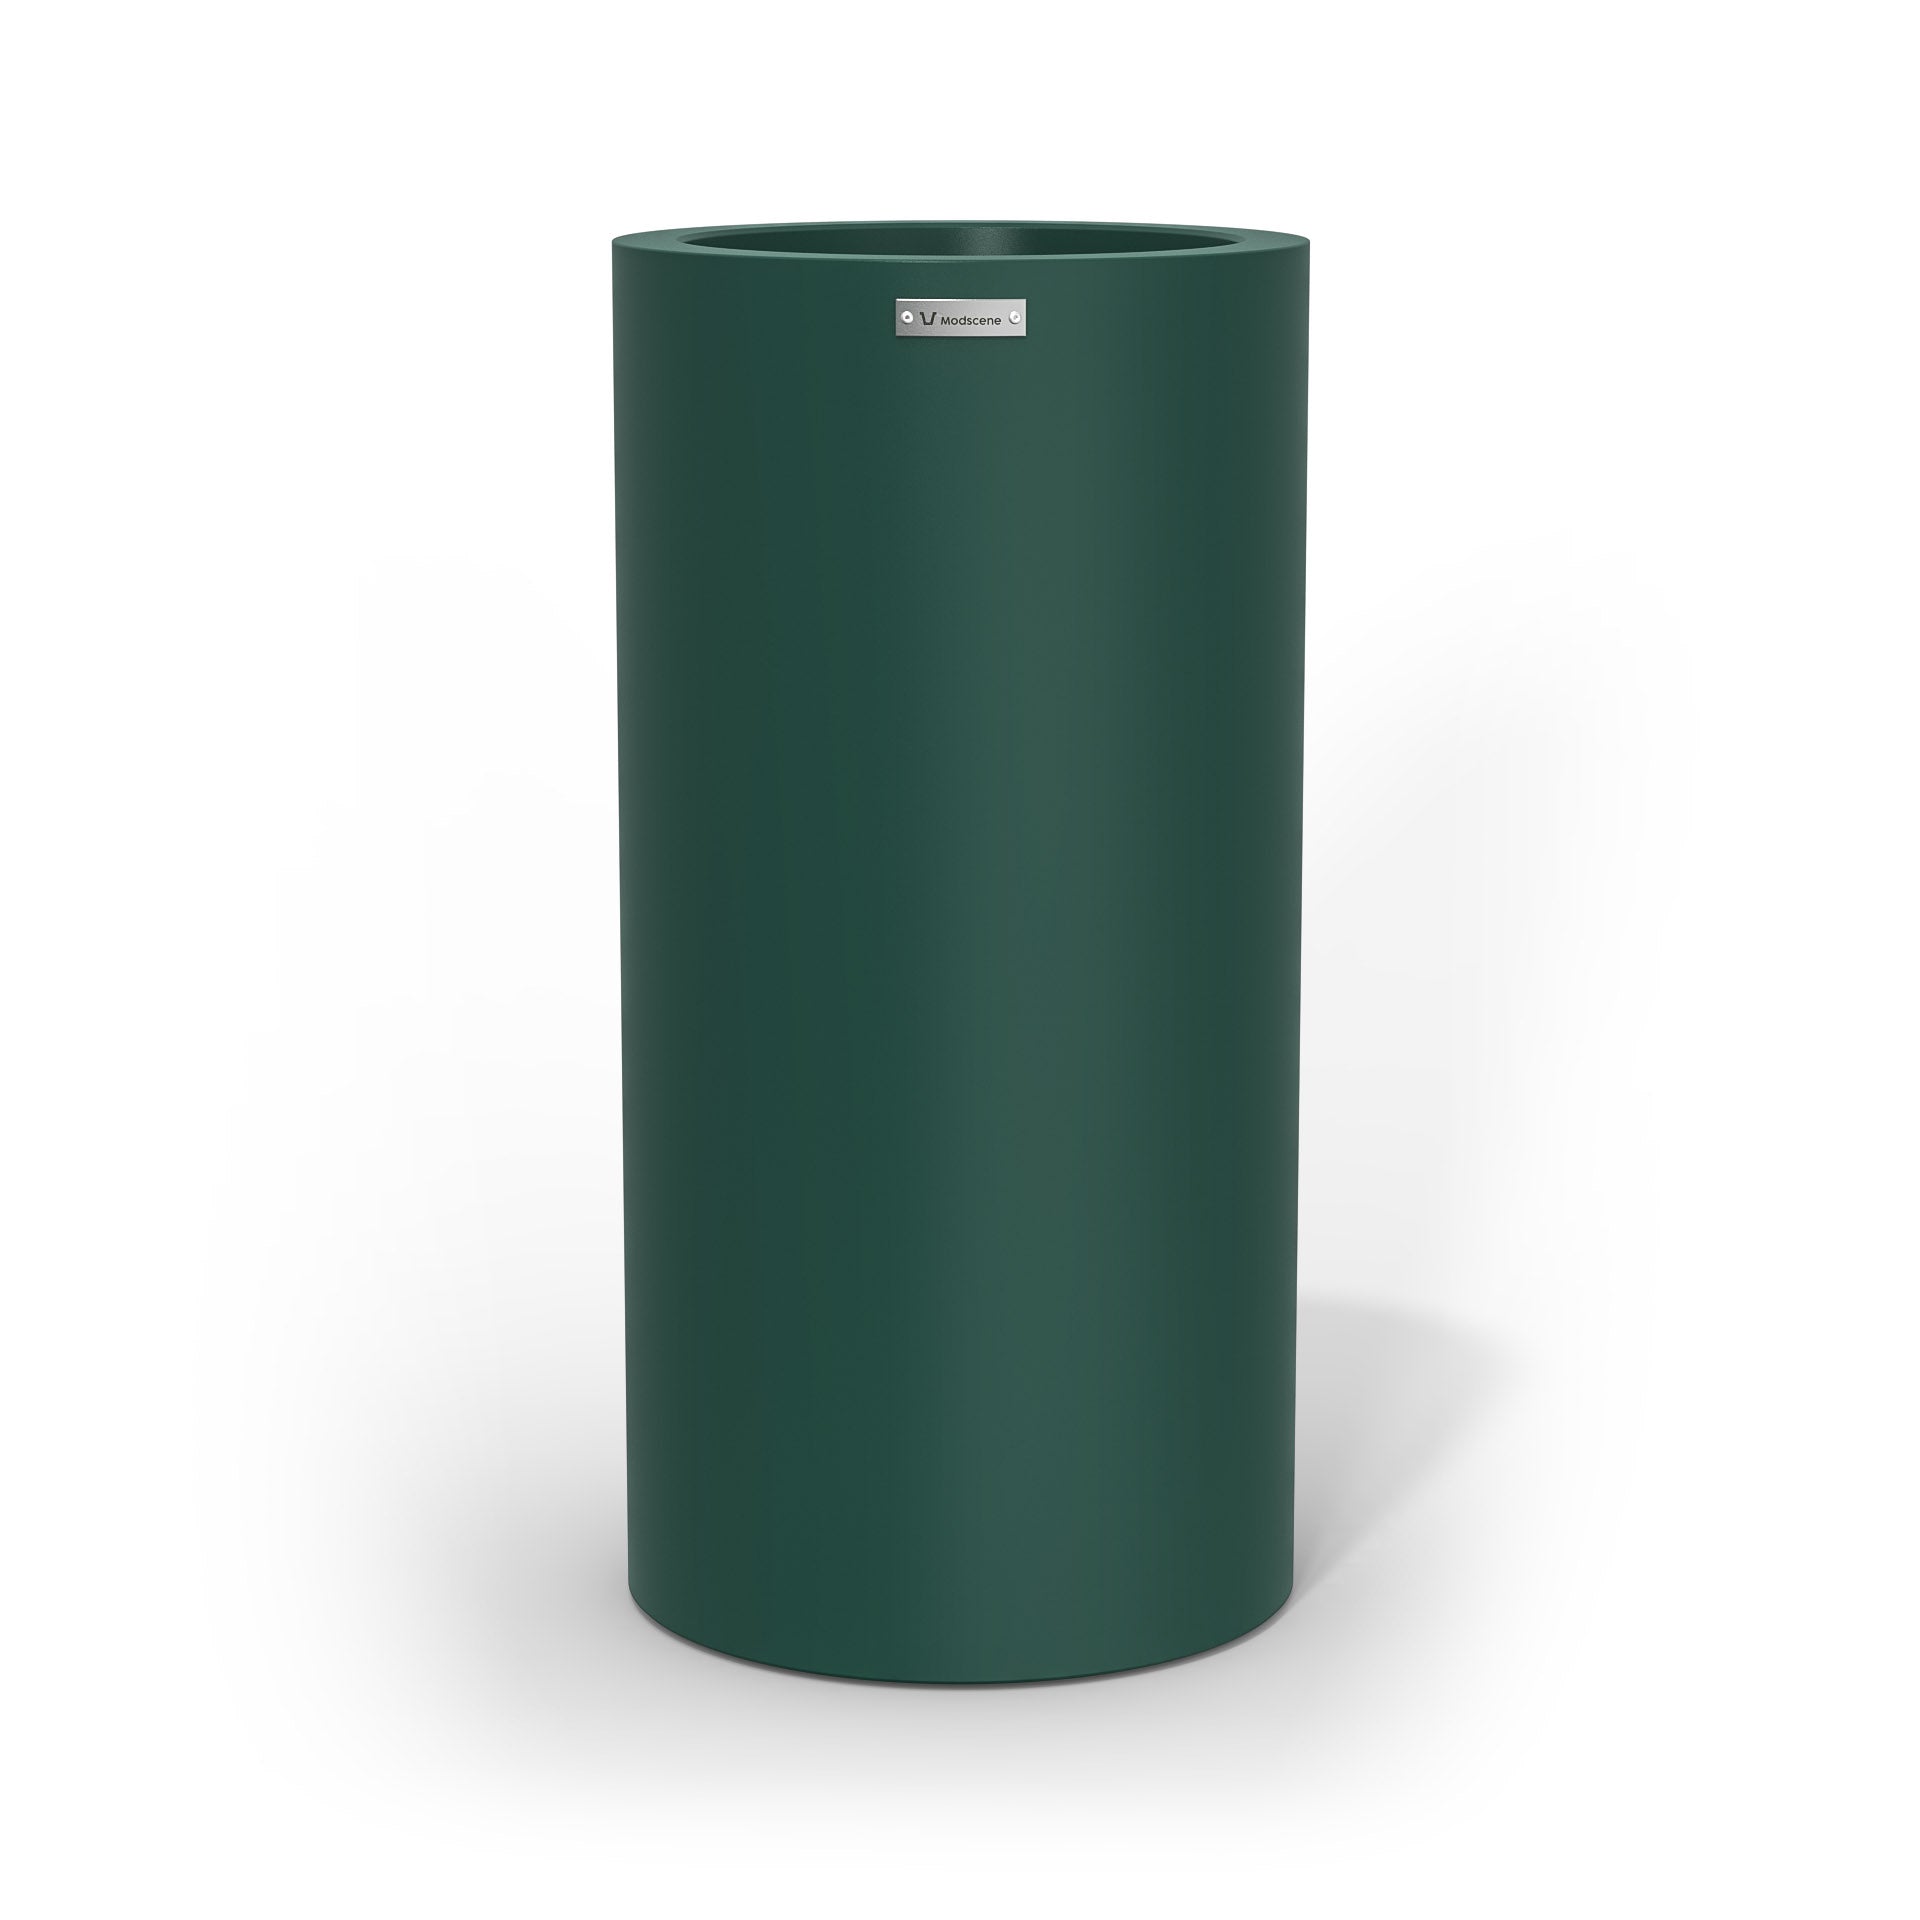 A large cigar cylinder pot planter in a emerald green colour. 